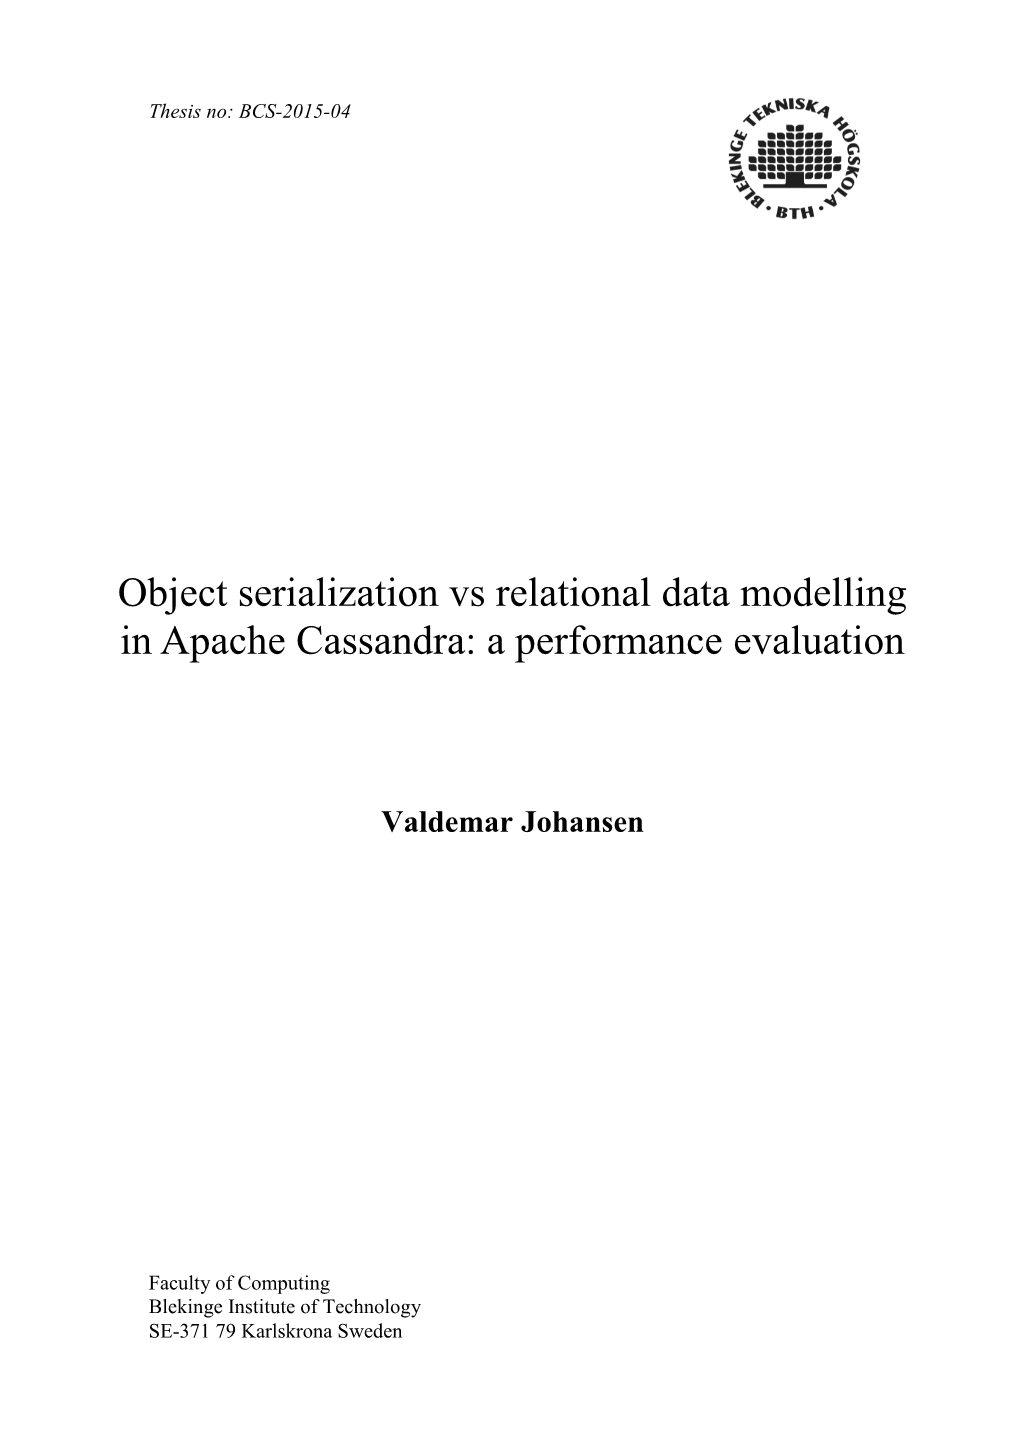 Object Serialization Vs Relational Data Modelling in Apache Cassandra: a Performance Evaluation